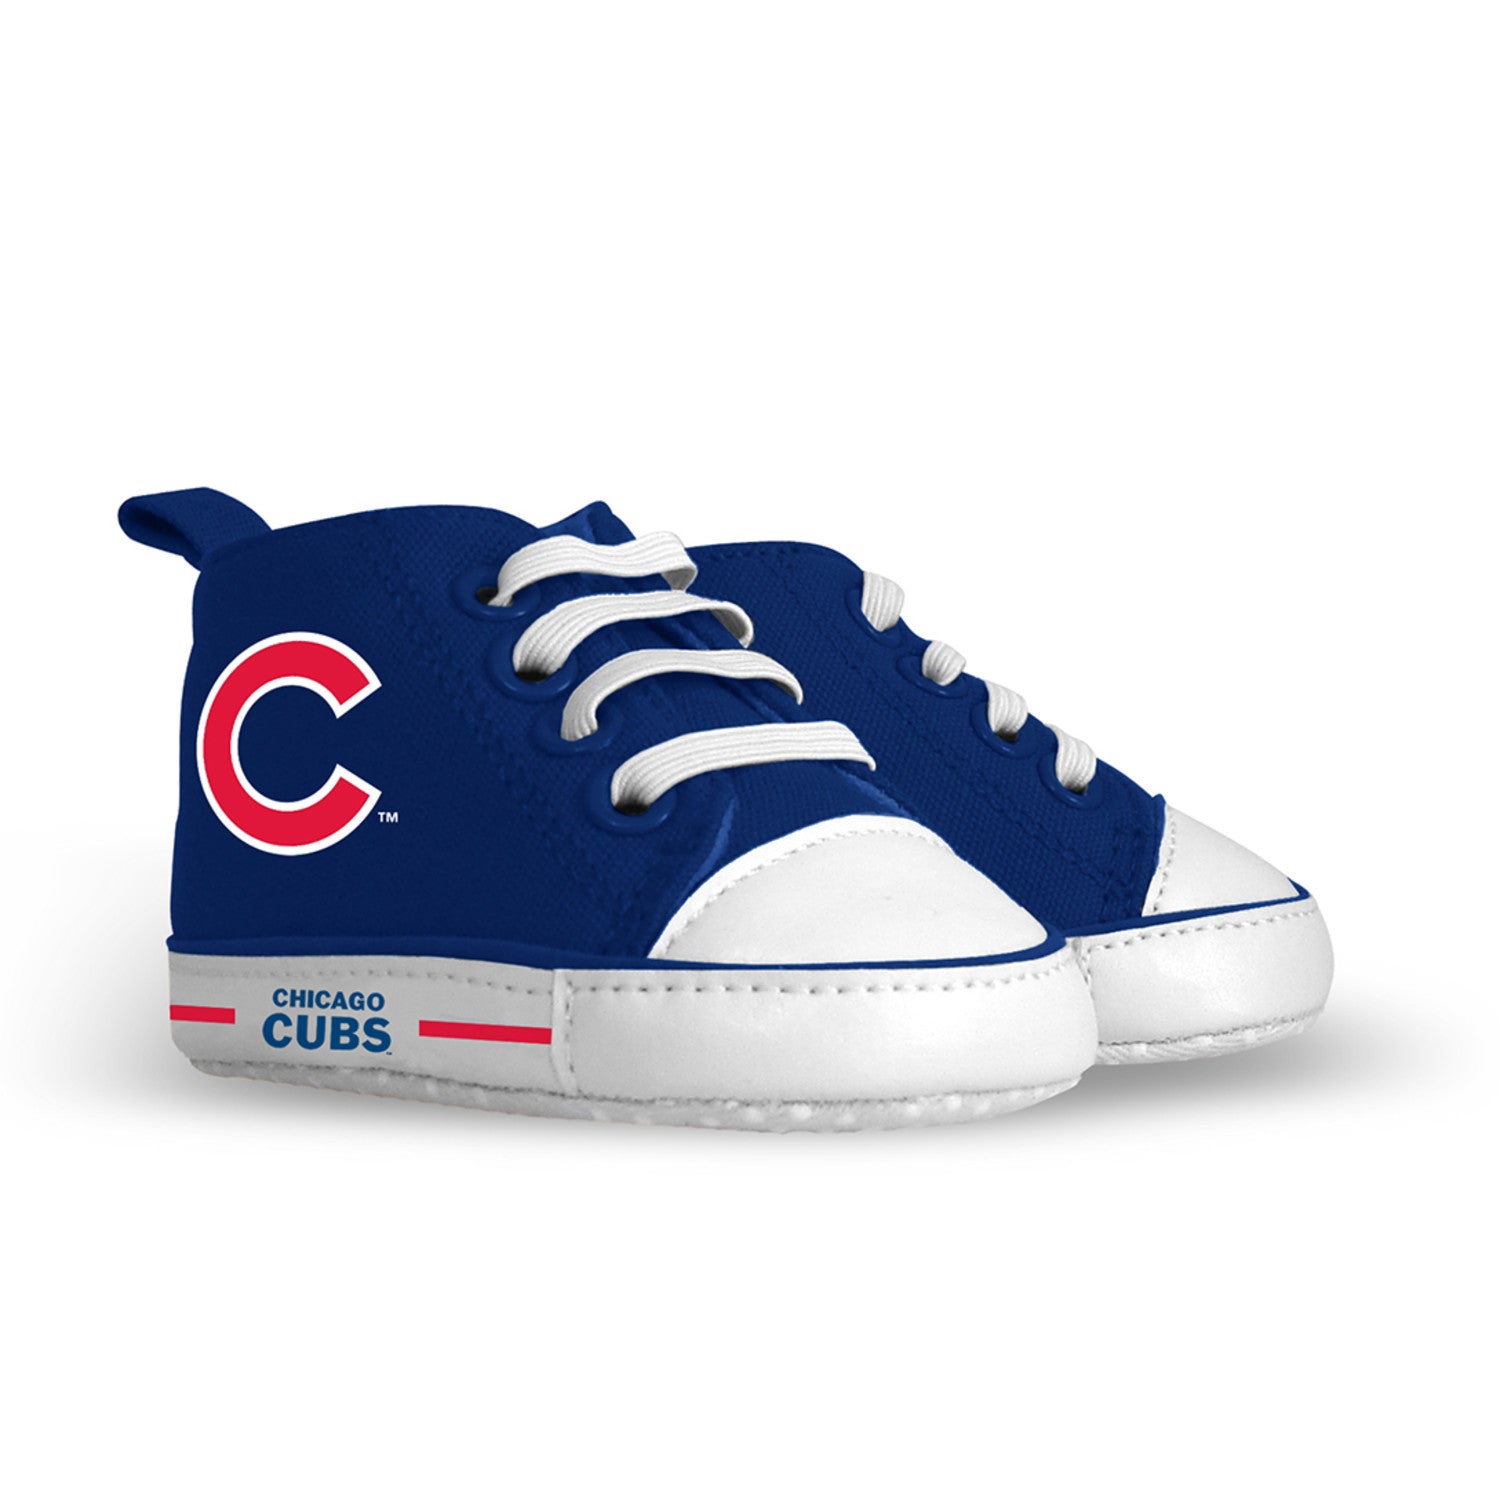 Chicago Cubs Baby Shoes